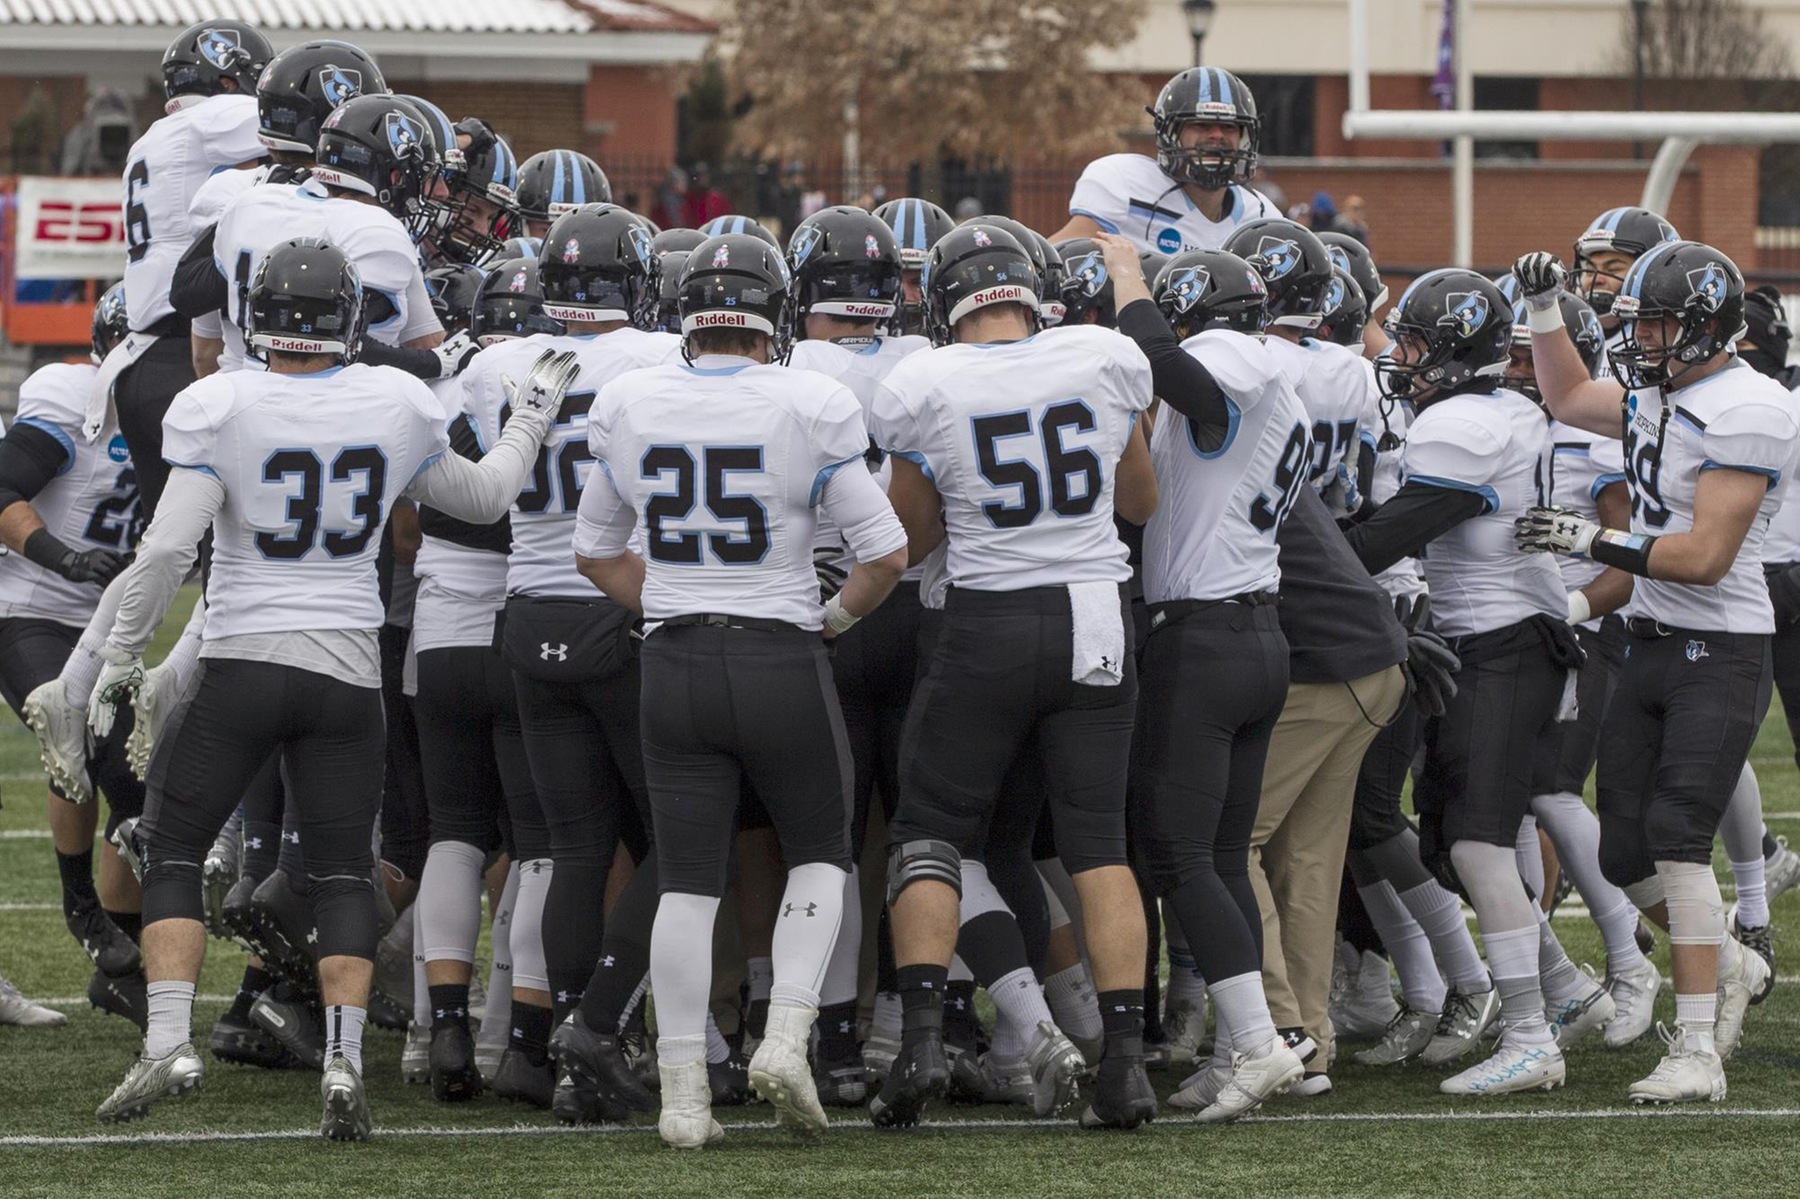 Johns Hopkins fell to defending national champion Mount Union, 28-20.